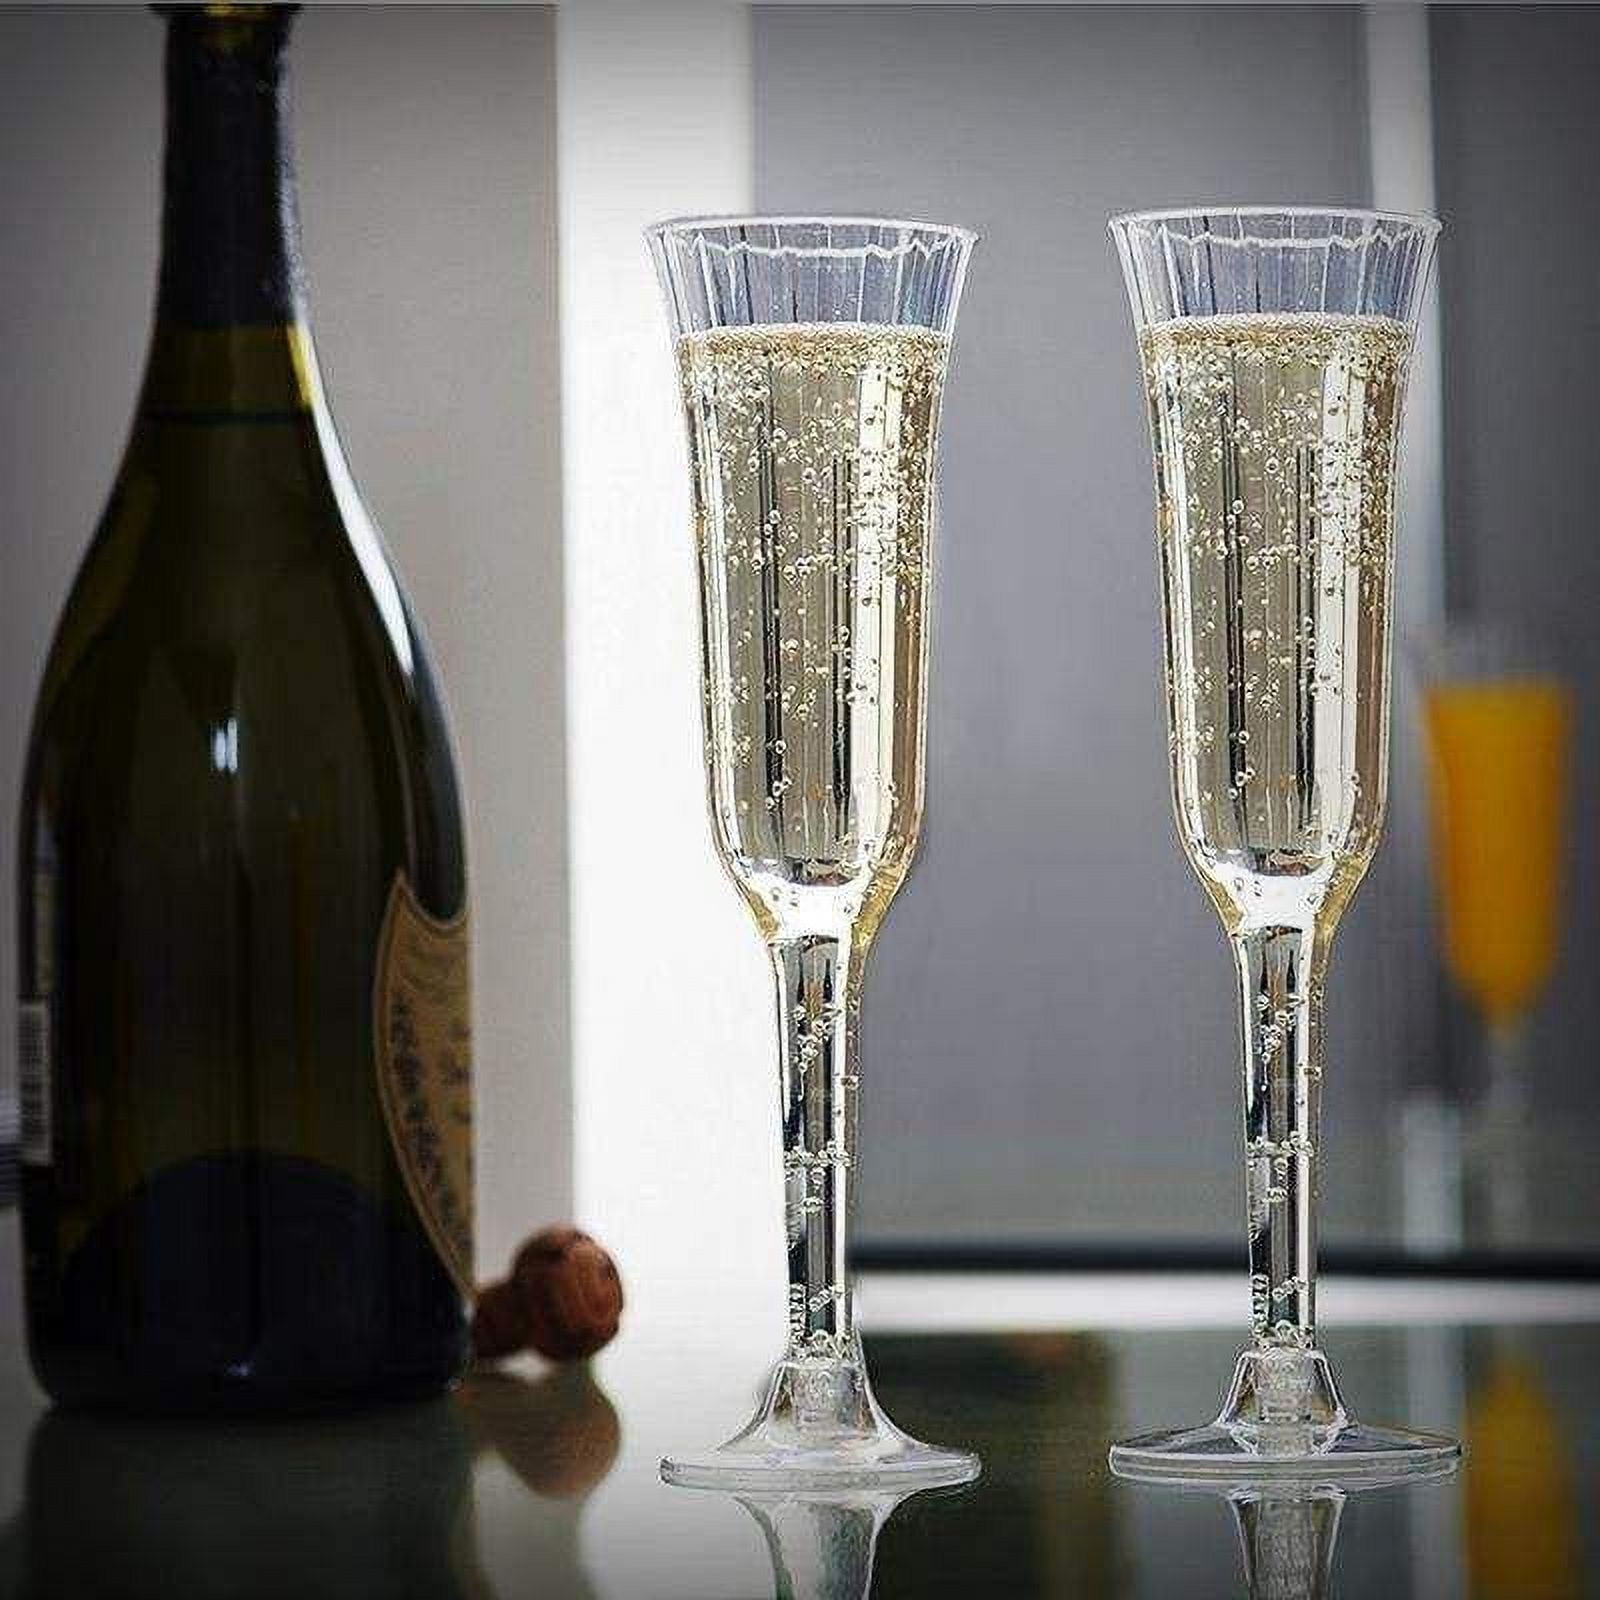 The champagne flute moulds for ice pops that will make your summer!